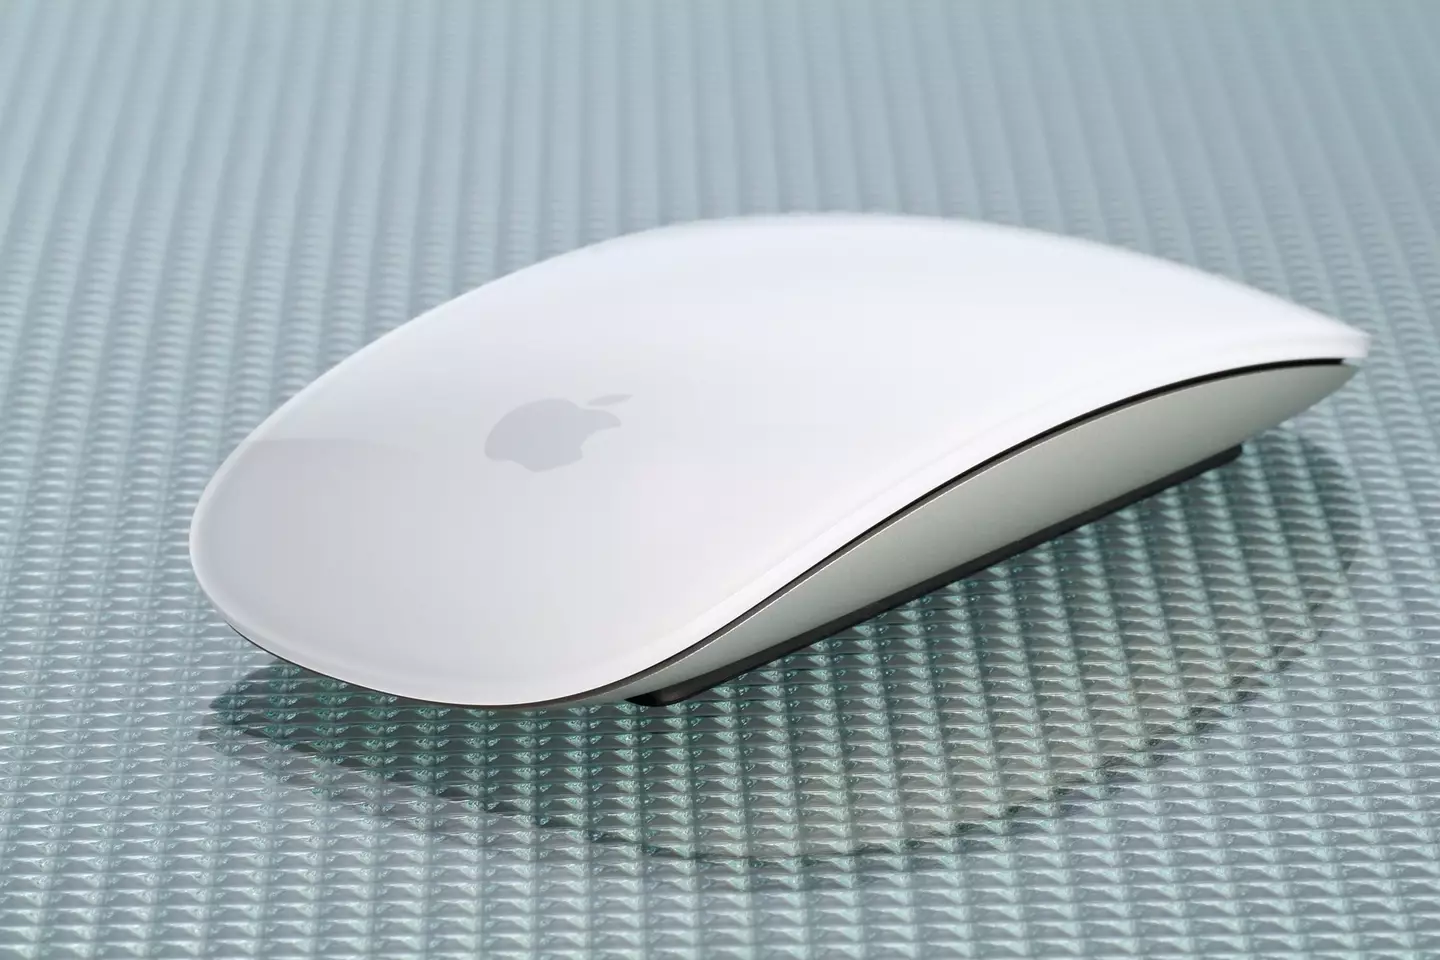 People expressed their frustration over the fact that to charge their Apple mouse, they had to plug it in.